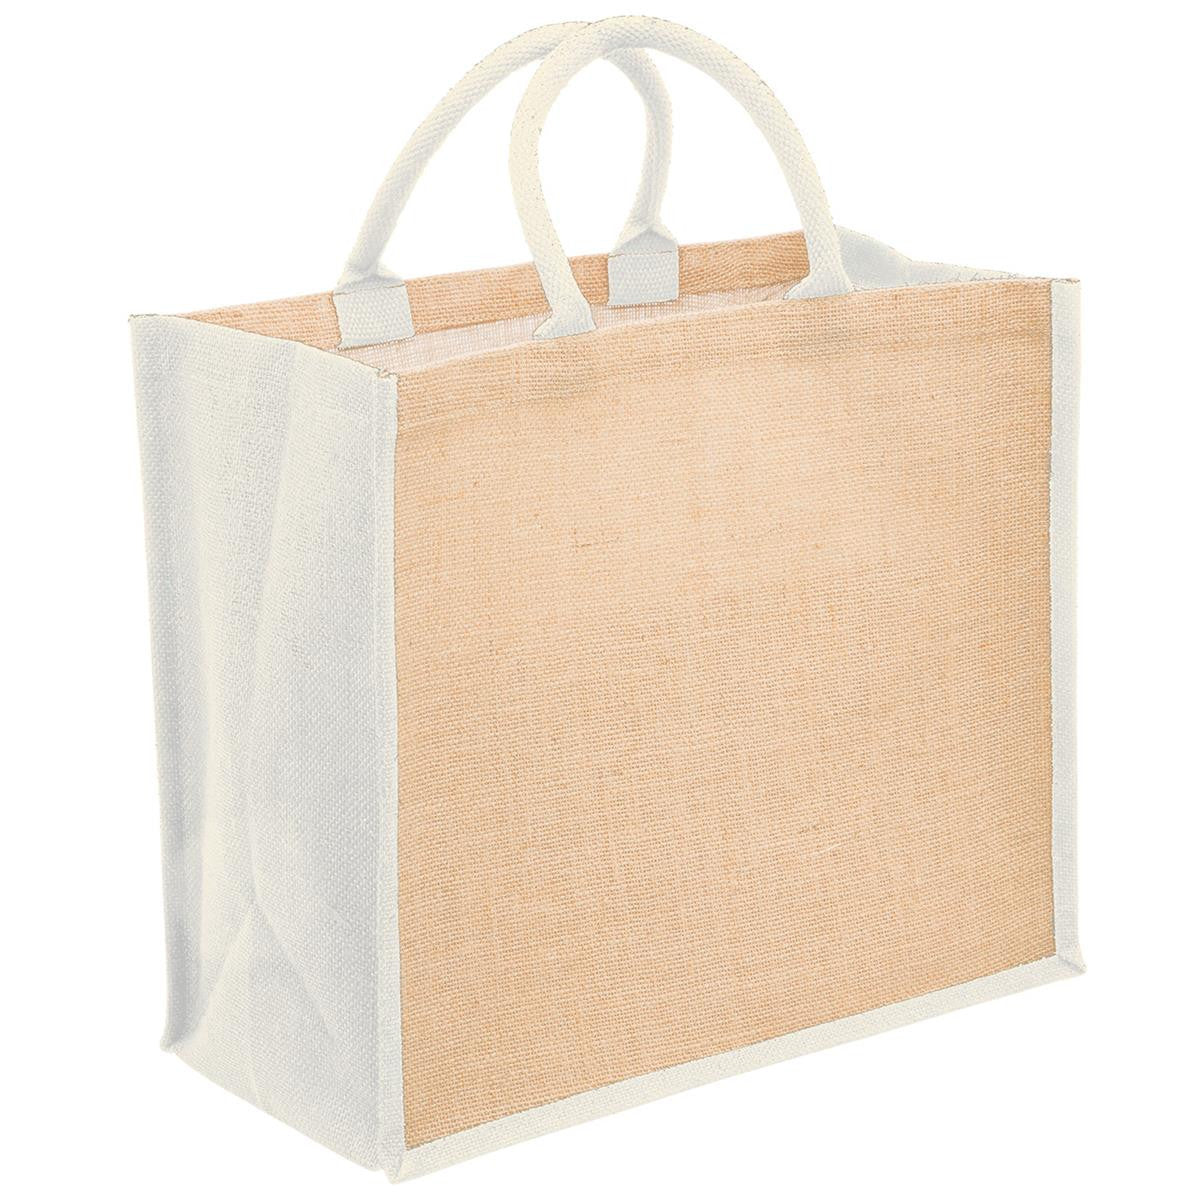 Legend Life-1184 Eco Jute Tote with wide gusset (Pack of 15)